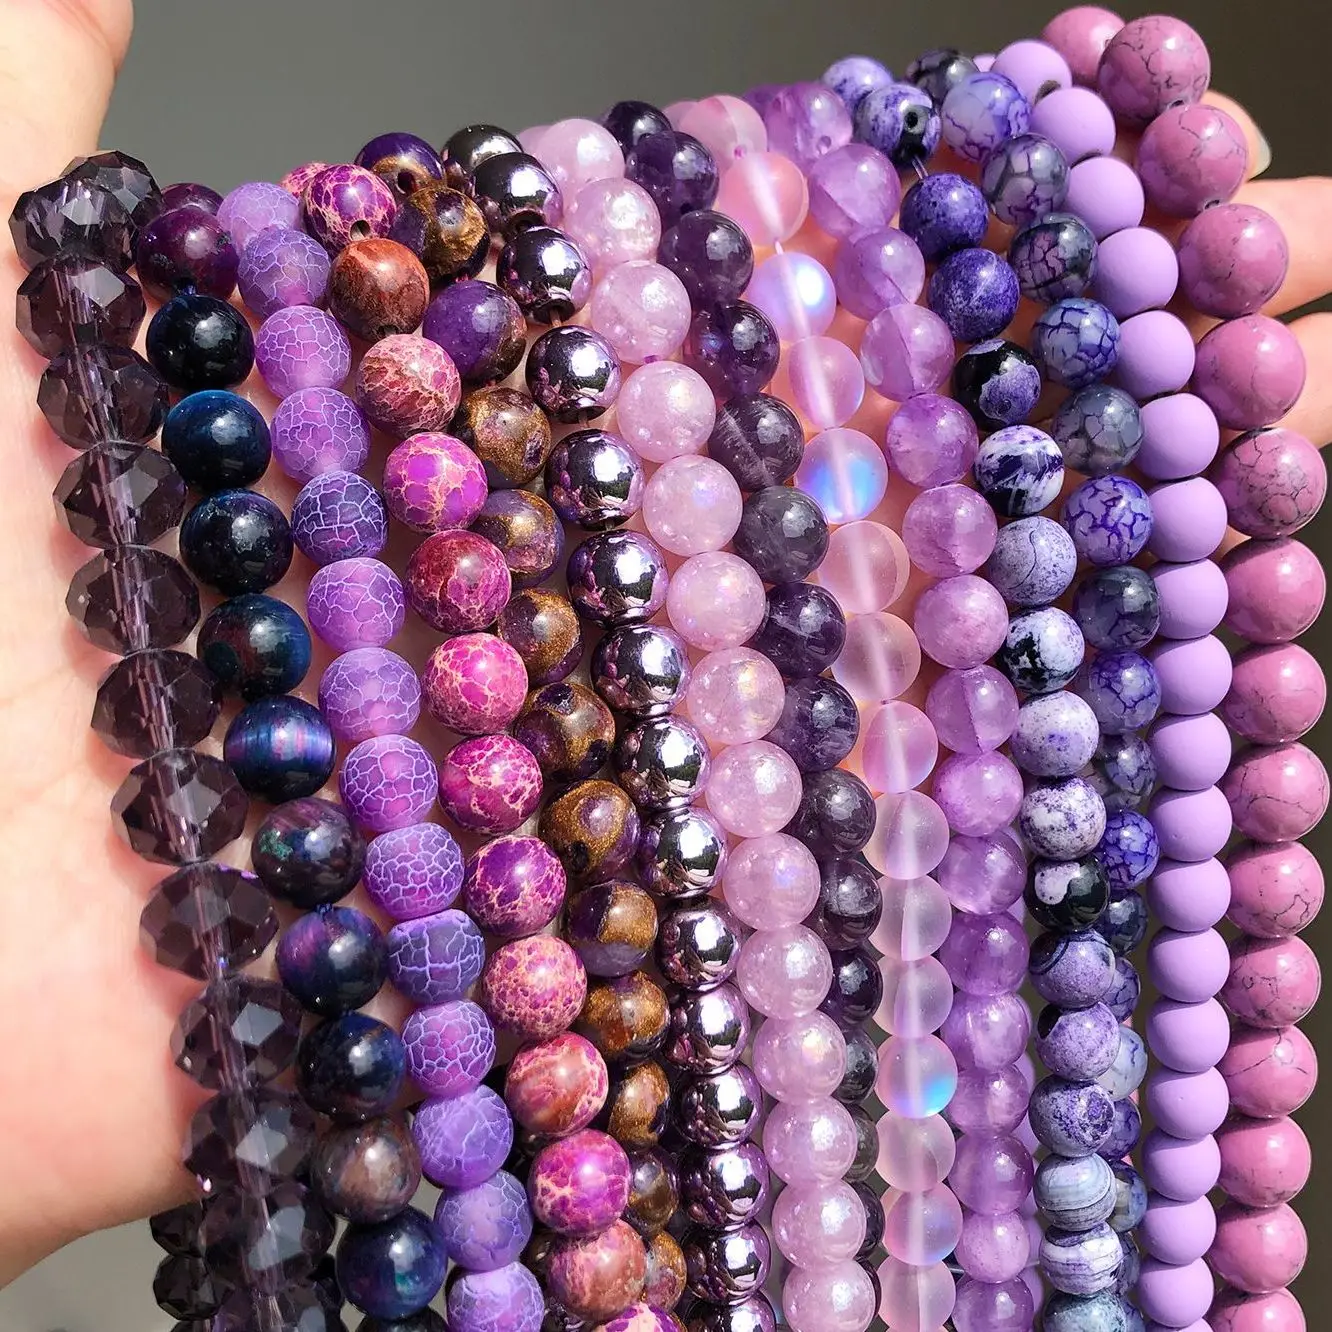 

4-12mm Natural Stones Purple Tiger Eye Crystal Amethysts Howlite Jades Round Loose Charms Beads for Jewelry Making DIY Bracelet